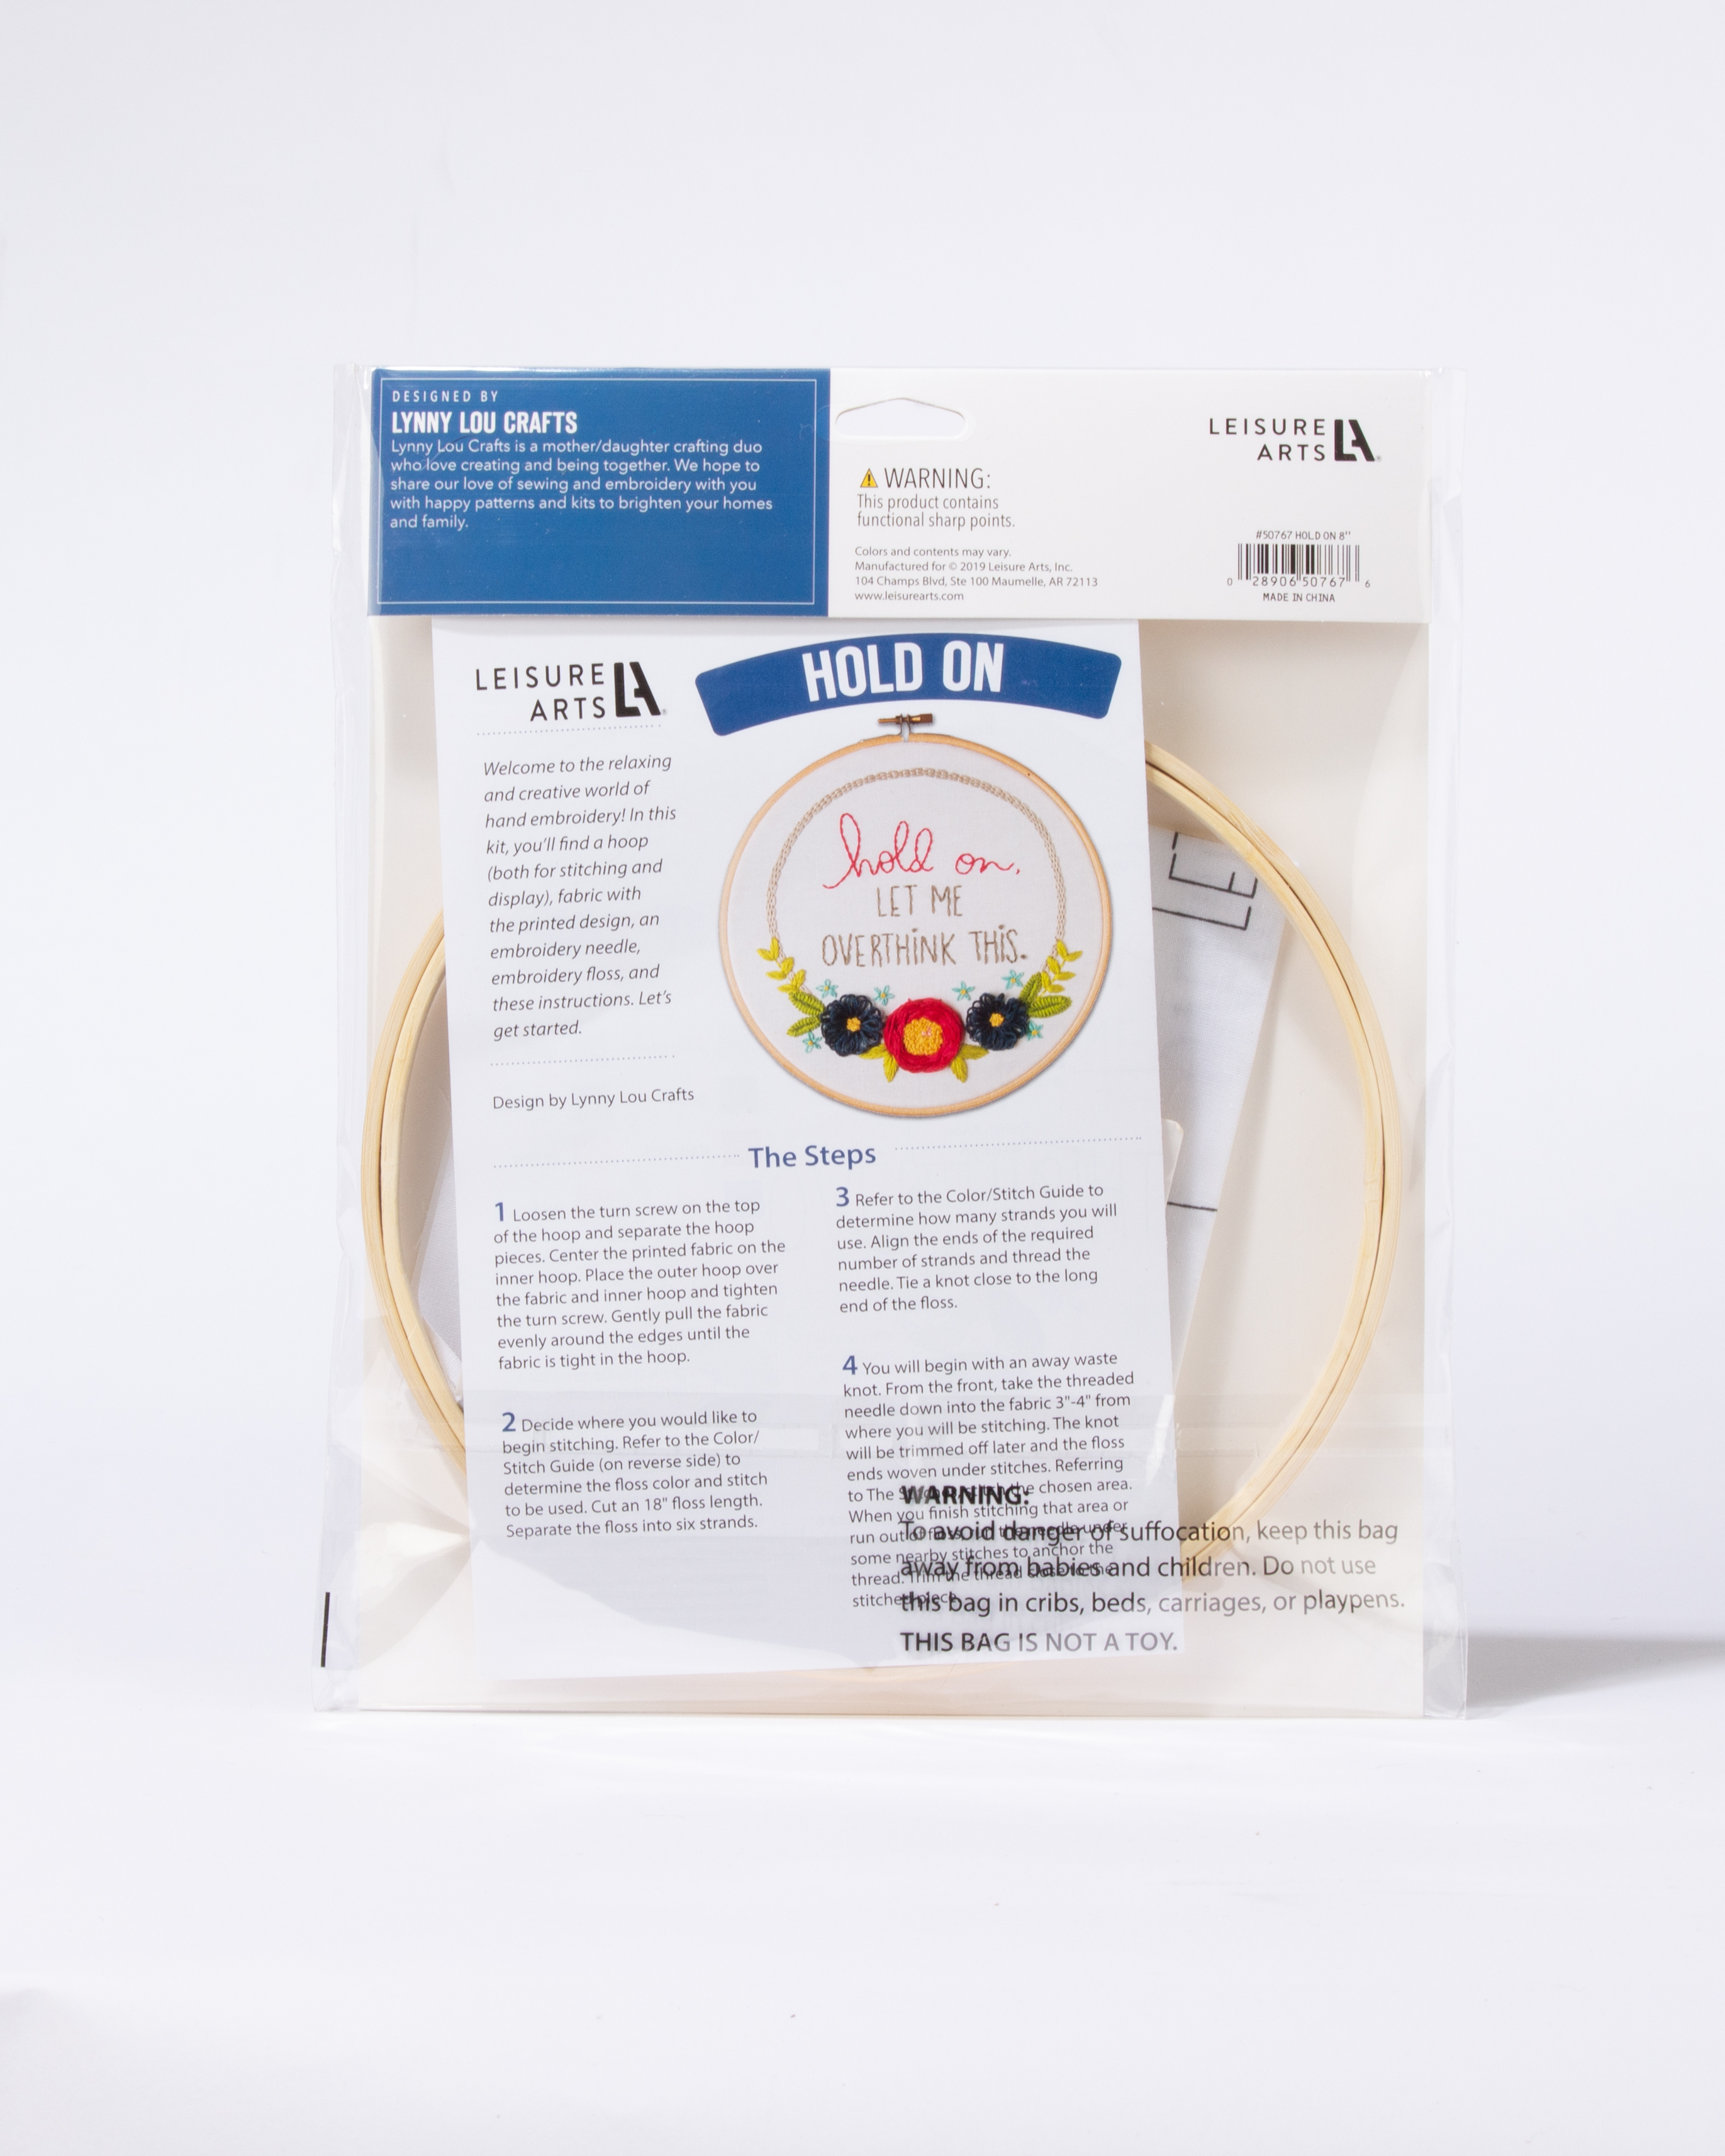 Learning Embroidery with an Embroidery Kit? Let's learn how to stitch!  (Leisure Arts Embroidery Kit) 